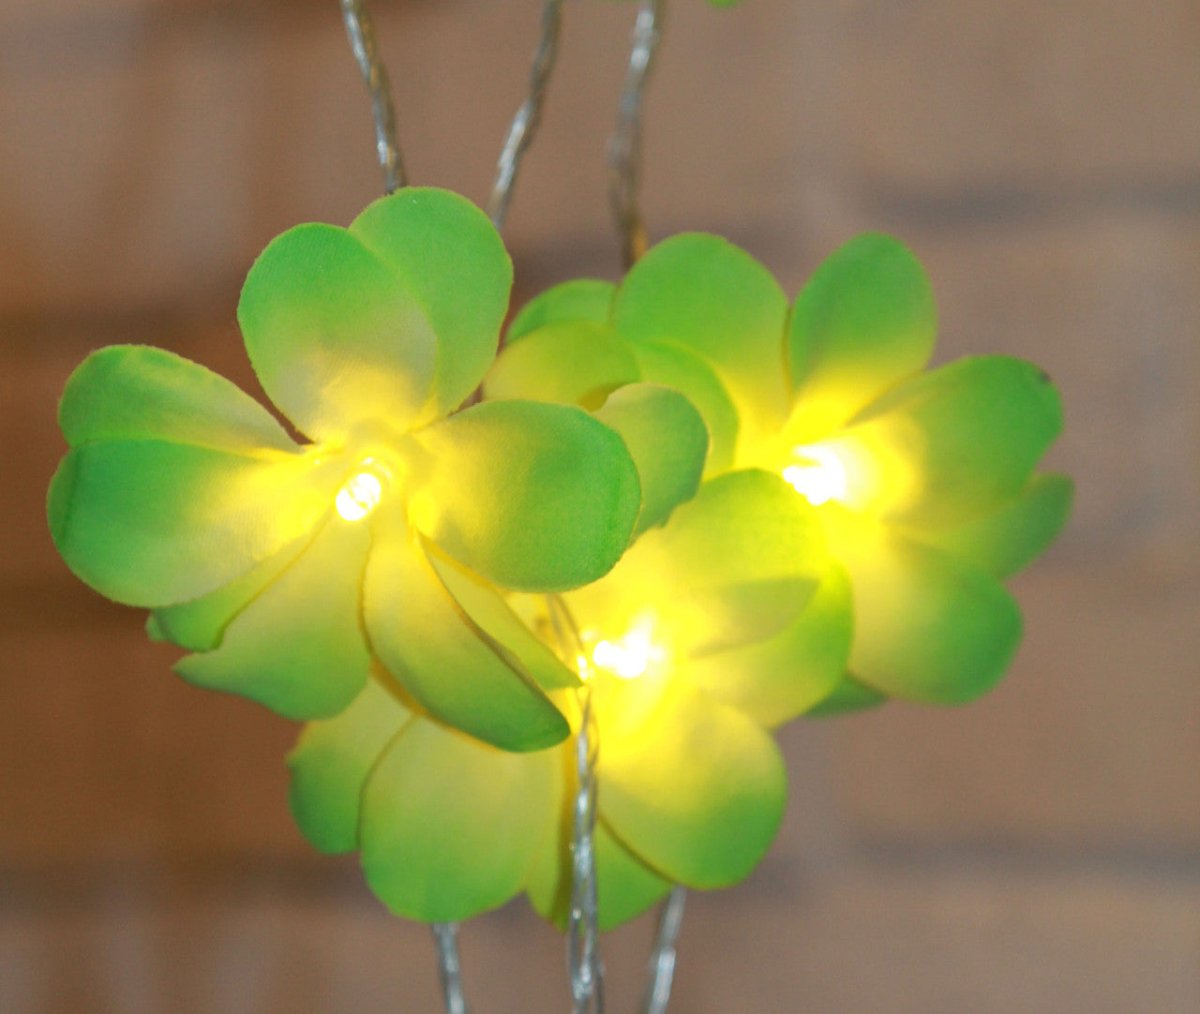 Set of 20 LED Green Frangipani Flower String Lights - Perfect for Christmas, Wedding & Outdoor Decorations - Outdoorium